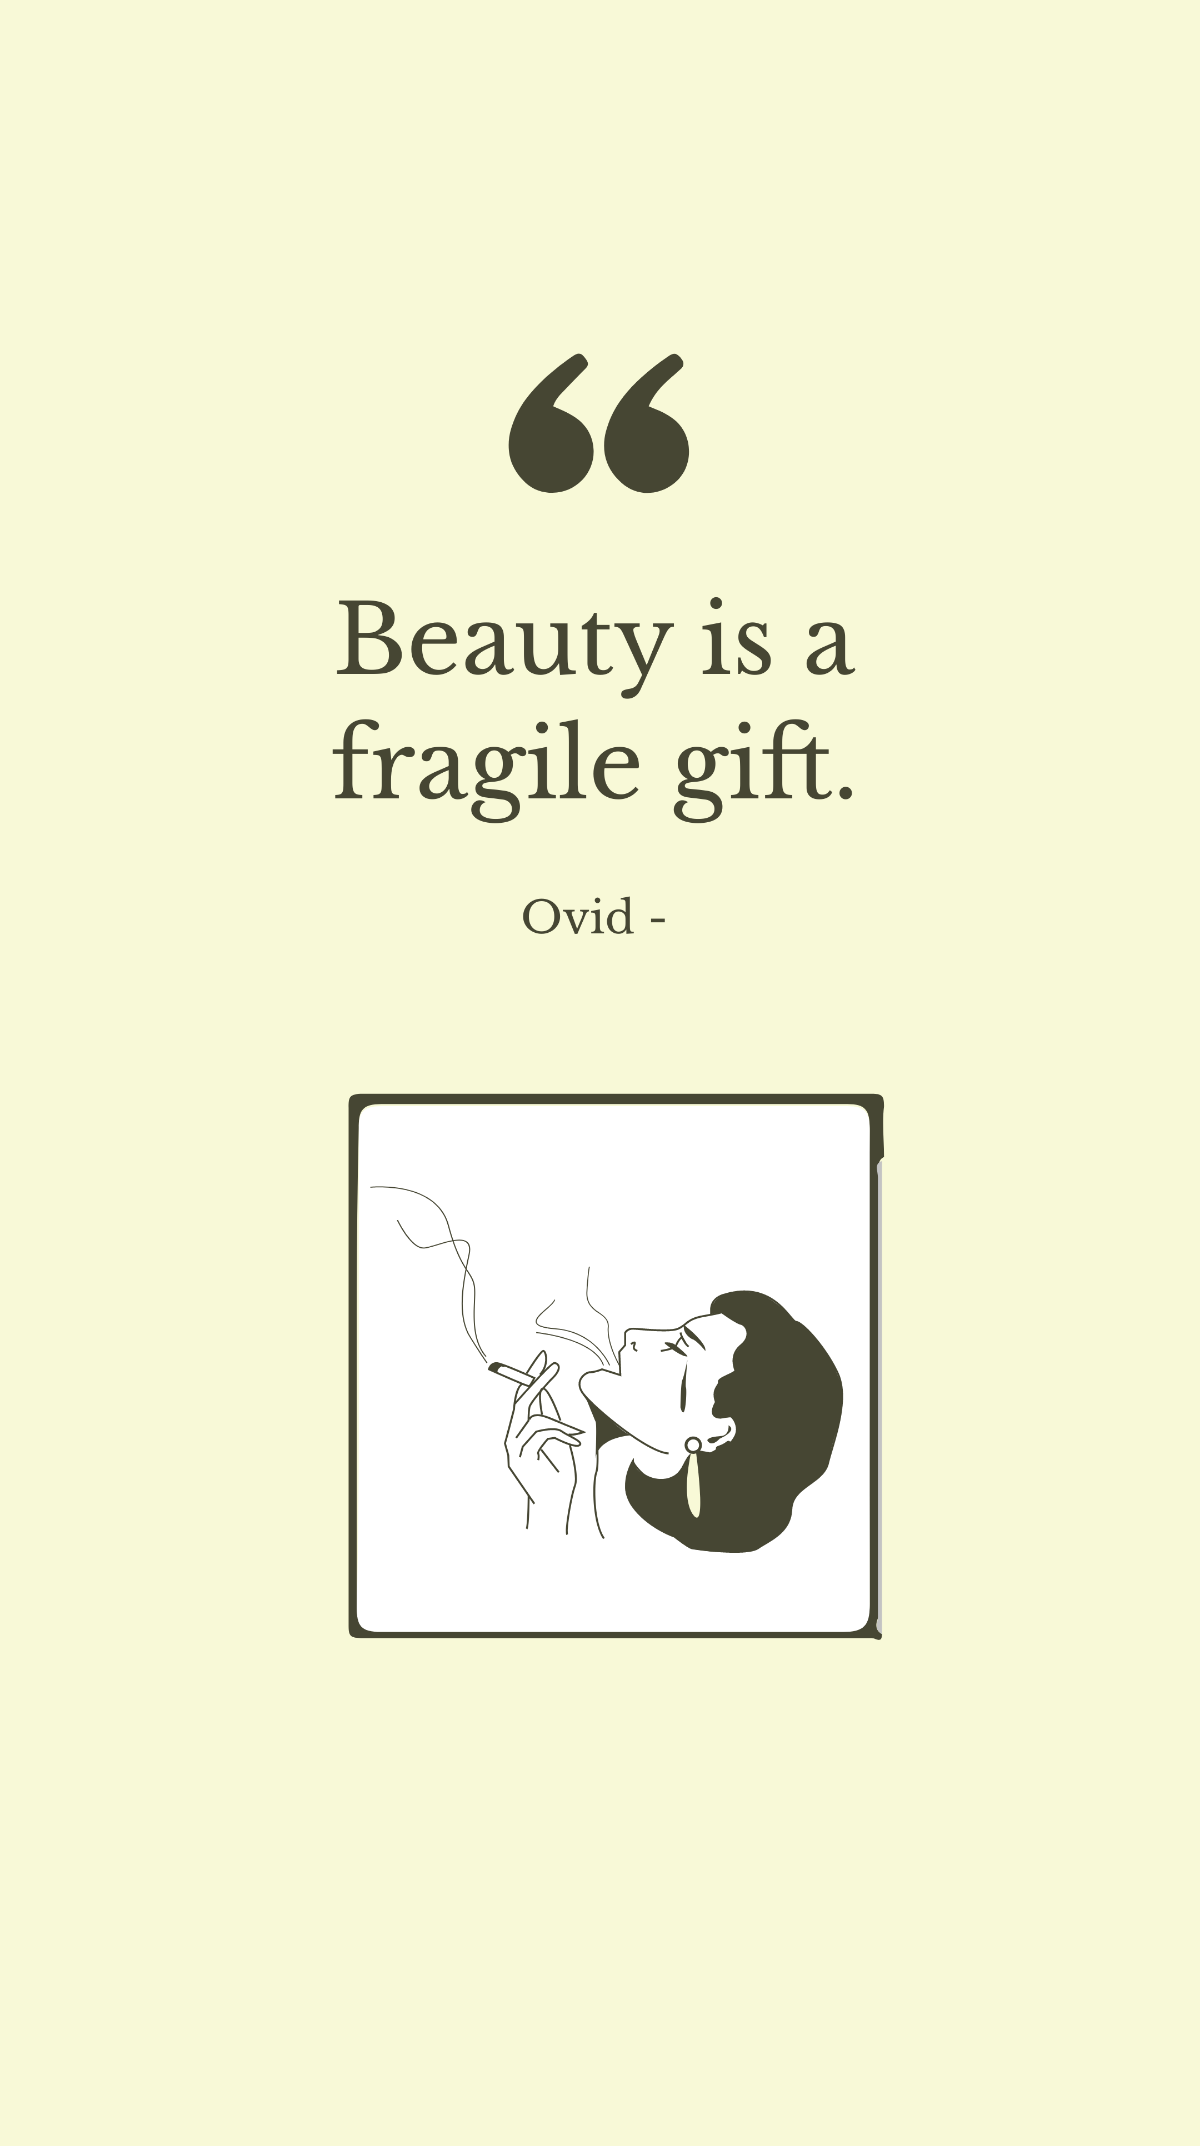 Free Ovid - Beauty is a fragile gift. Template